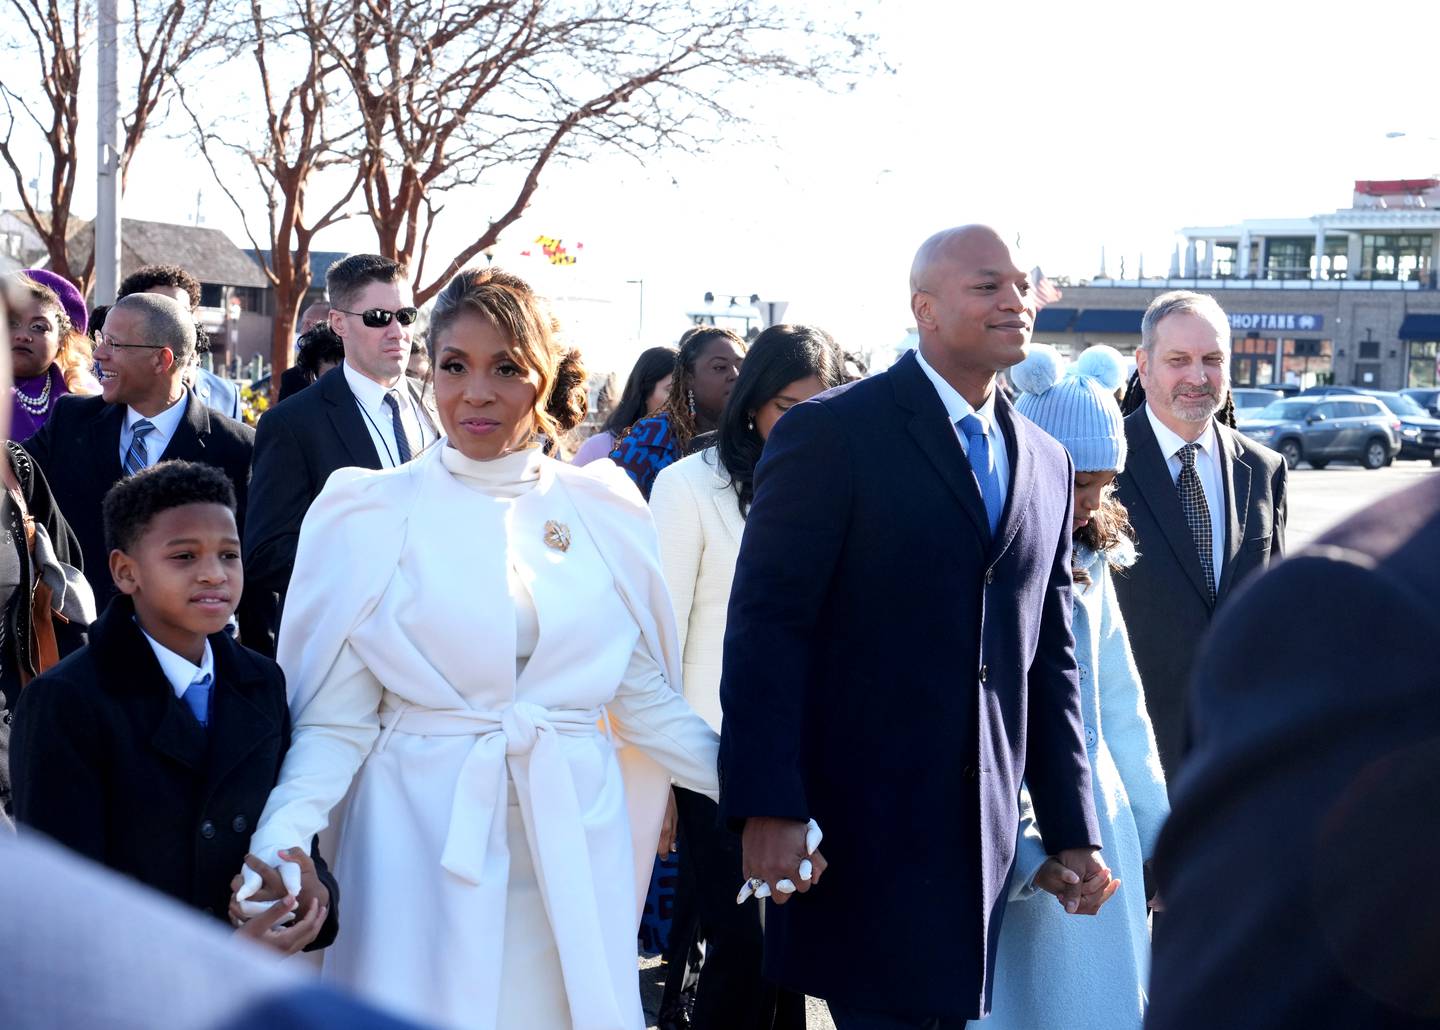 James Moore, Dawn Flythe Moore, Gov.-elect Wes Moore and Mia Moore depart the Kunta Kinte-Alex Haley Memorial, where they laid a wreath and said a prayer before the governor-elect was sworn in as the first African American governor of the state of Maryland.